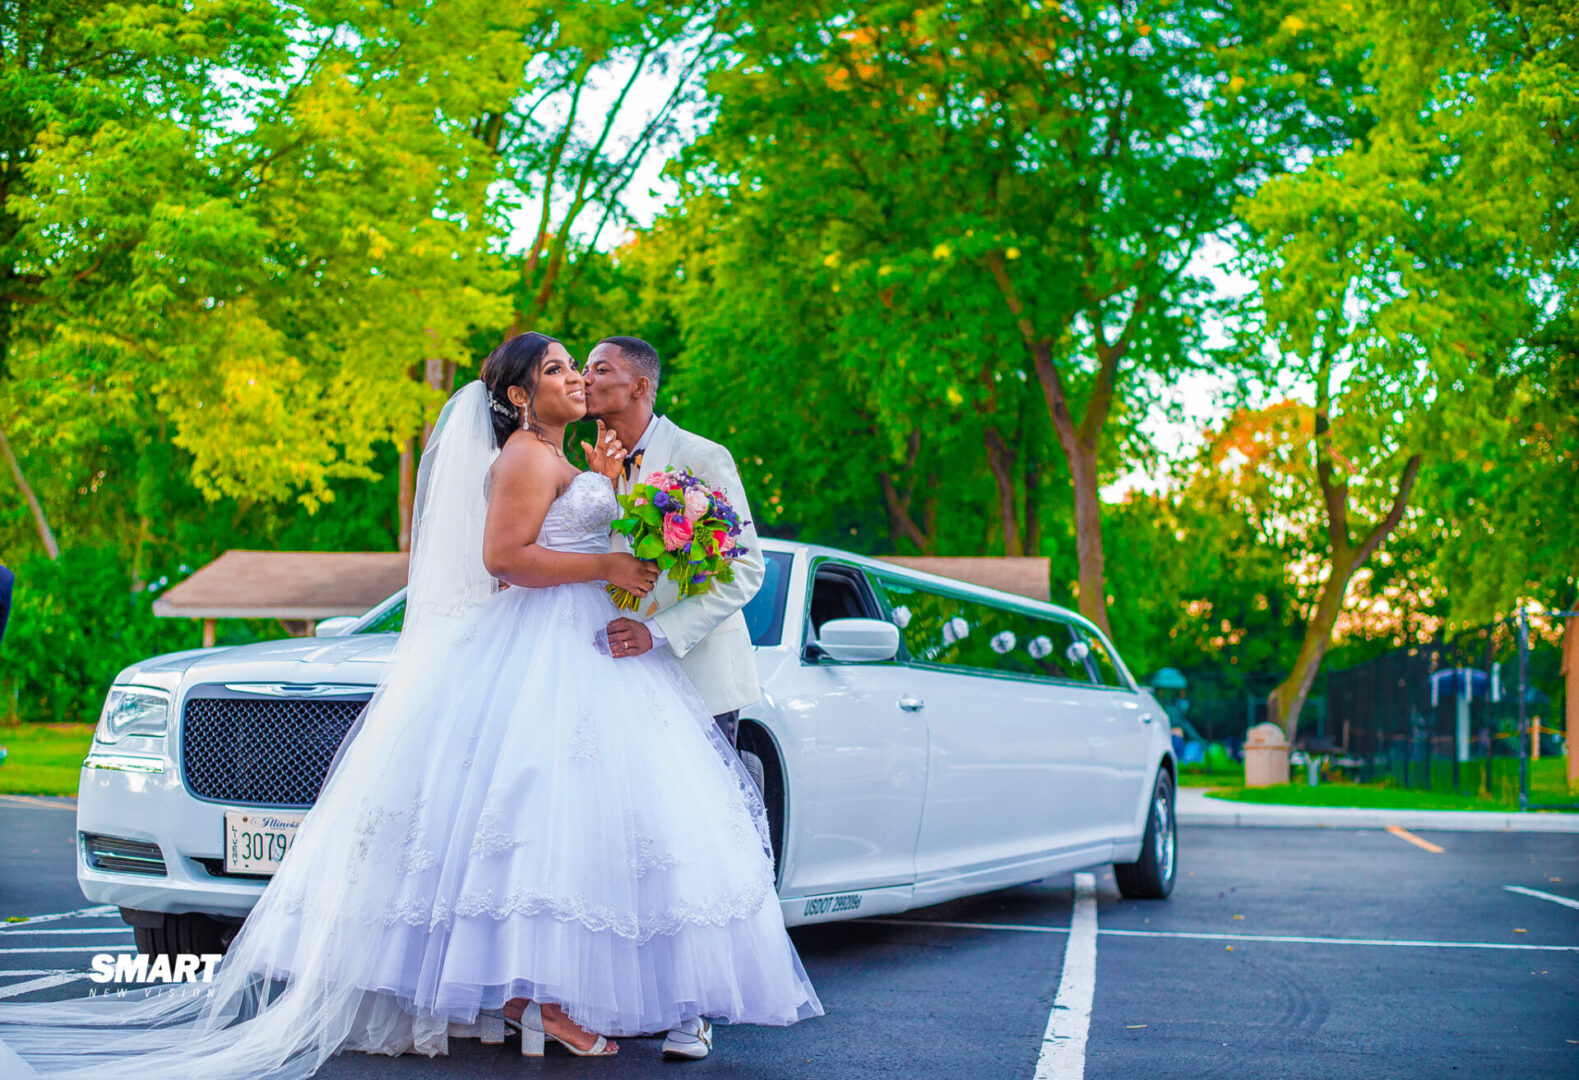 Bride and groom with limousine